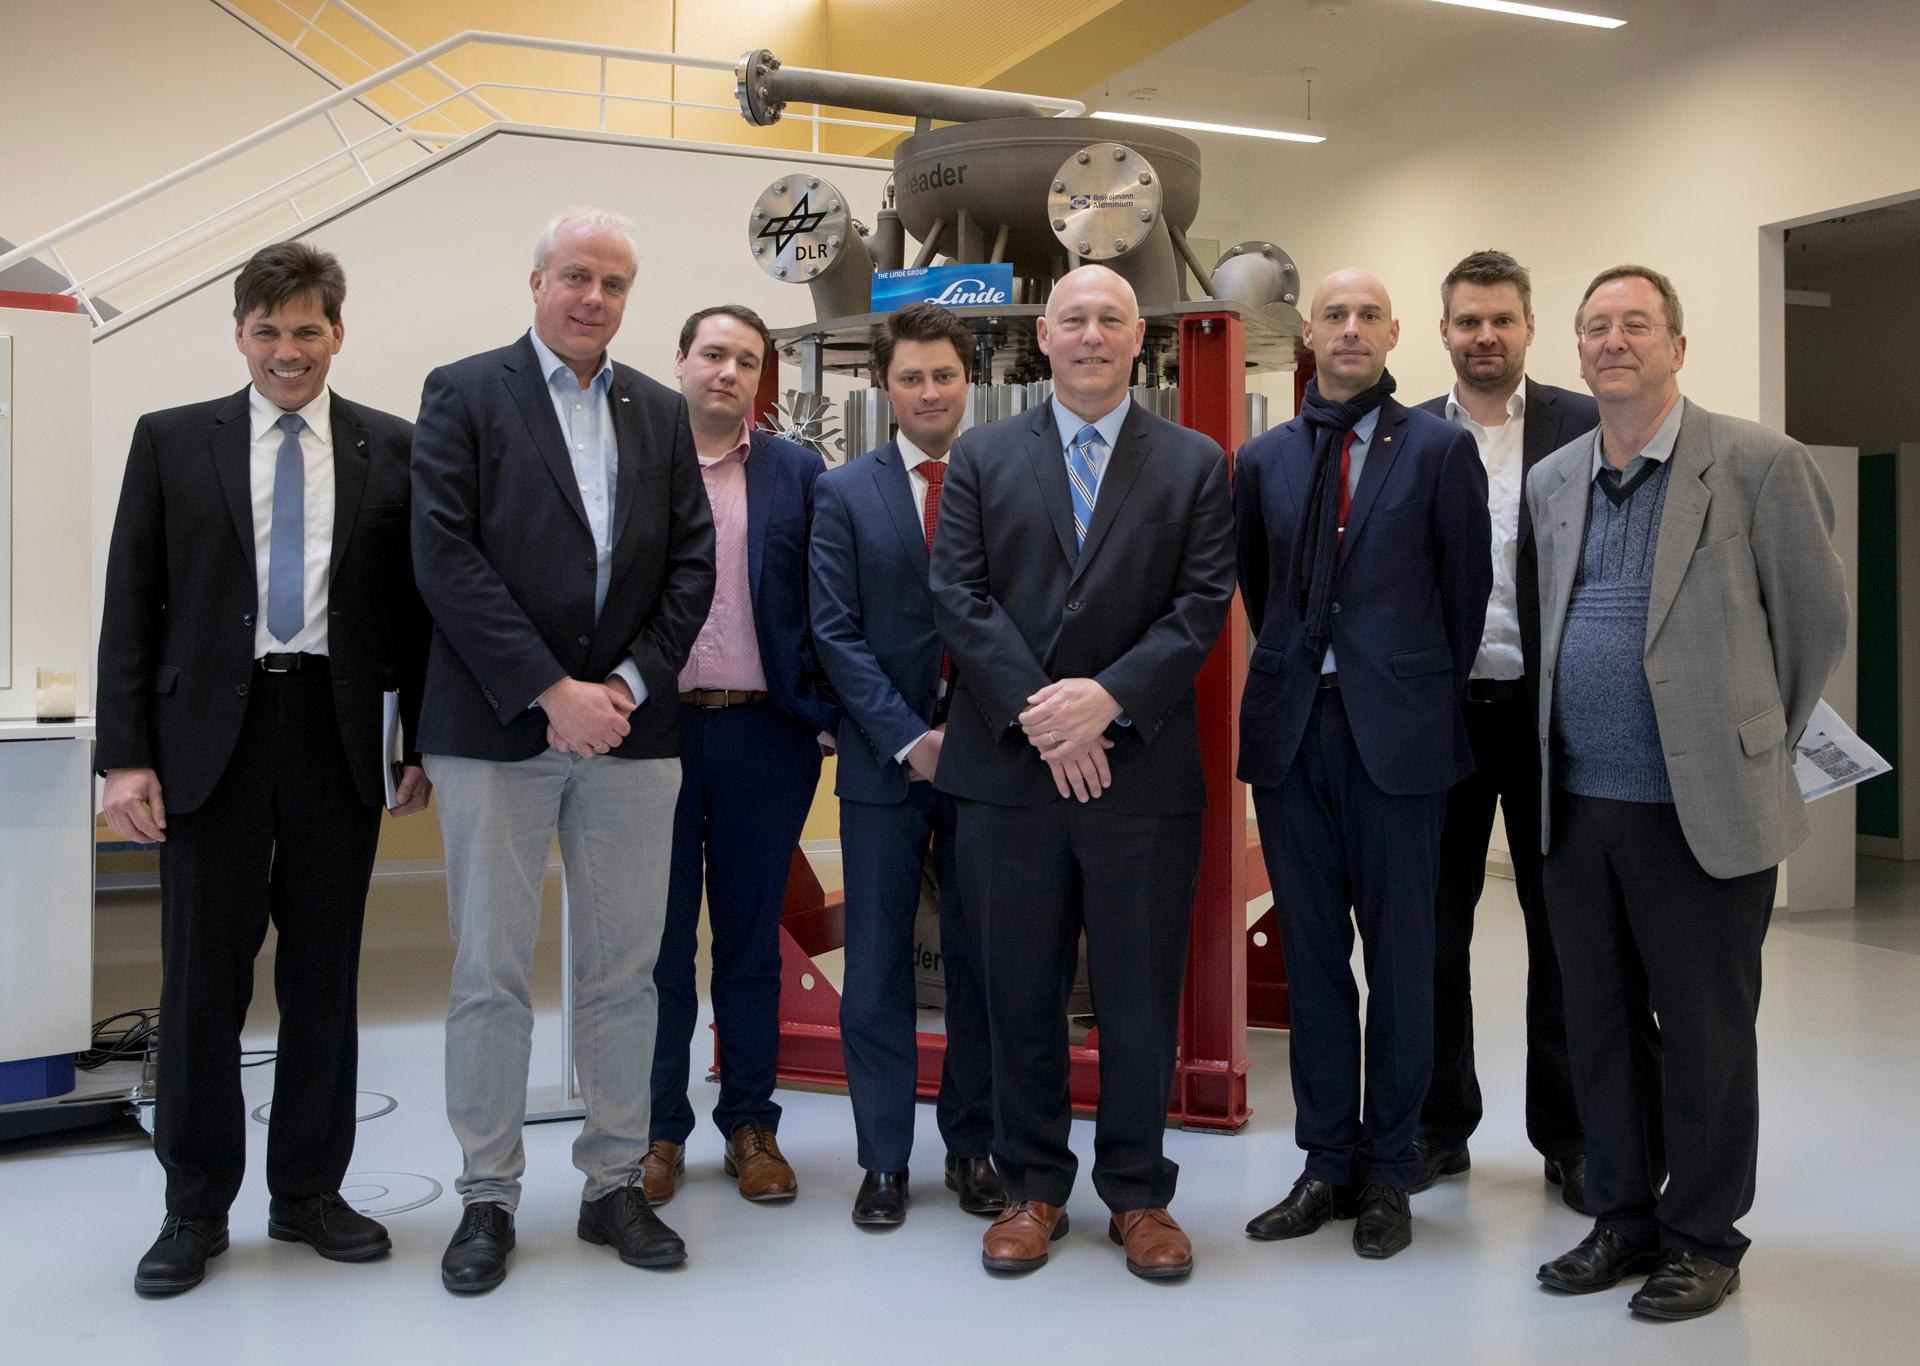 Energy research in focus – a delegation from the US Department of Energy visited DLR Stuttgart